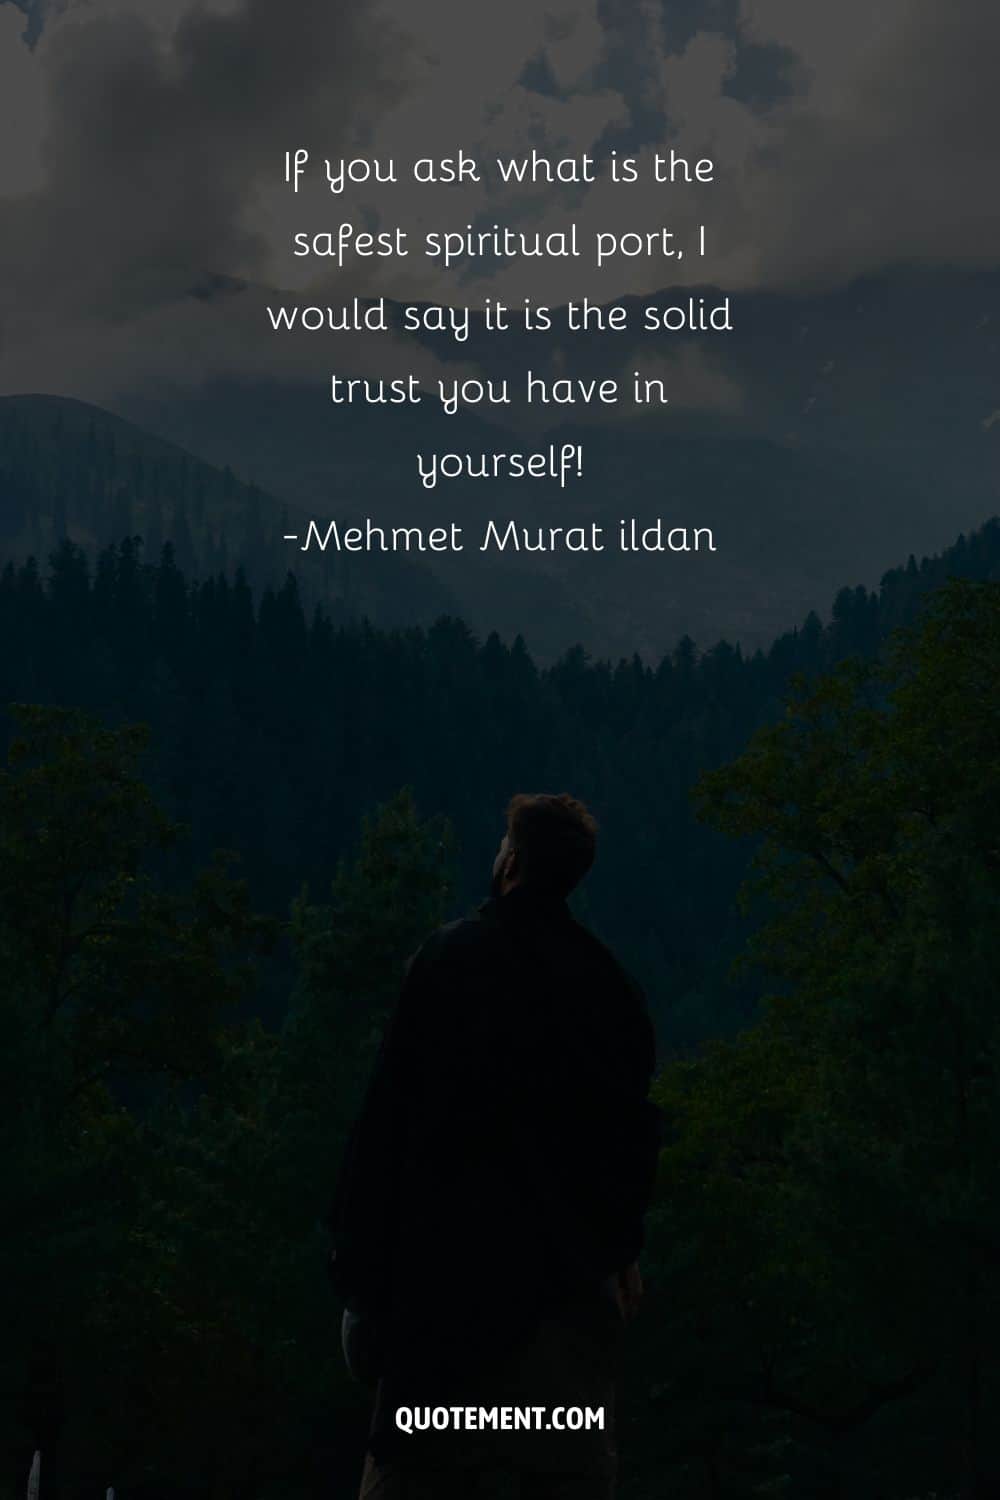 a guy in the woods image representing motivational trust yourself quote